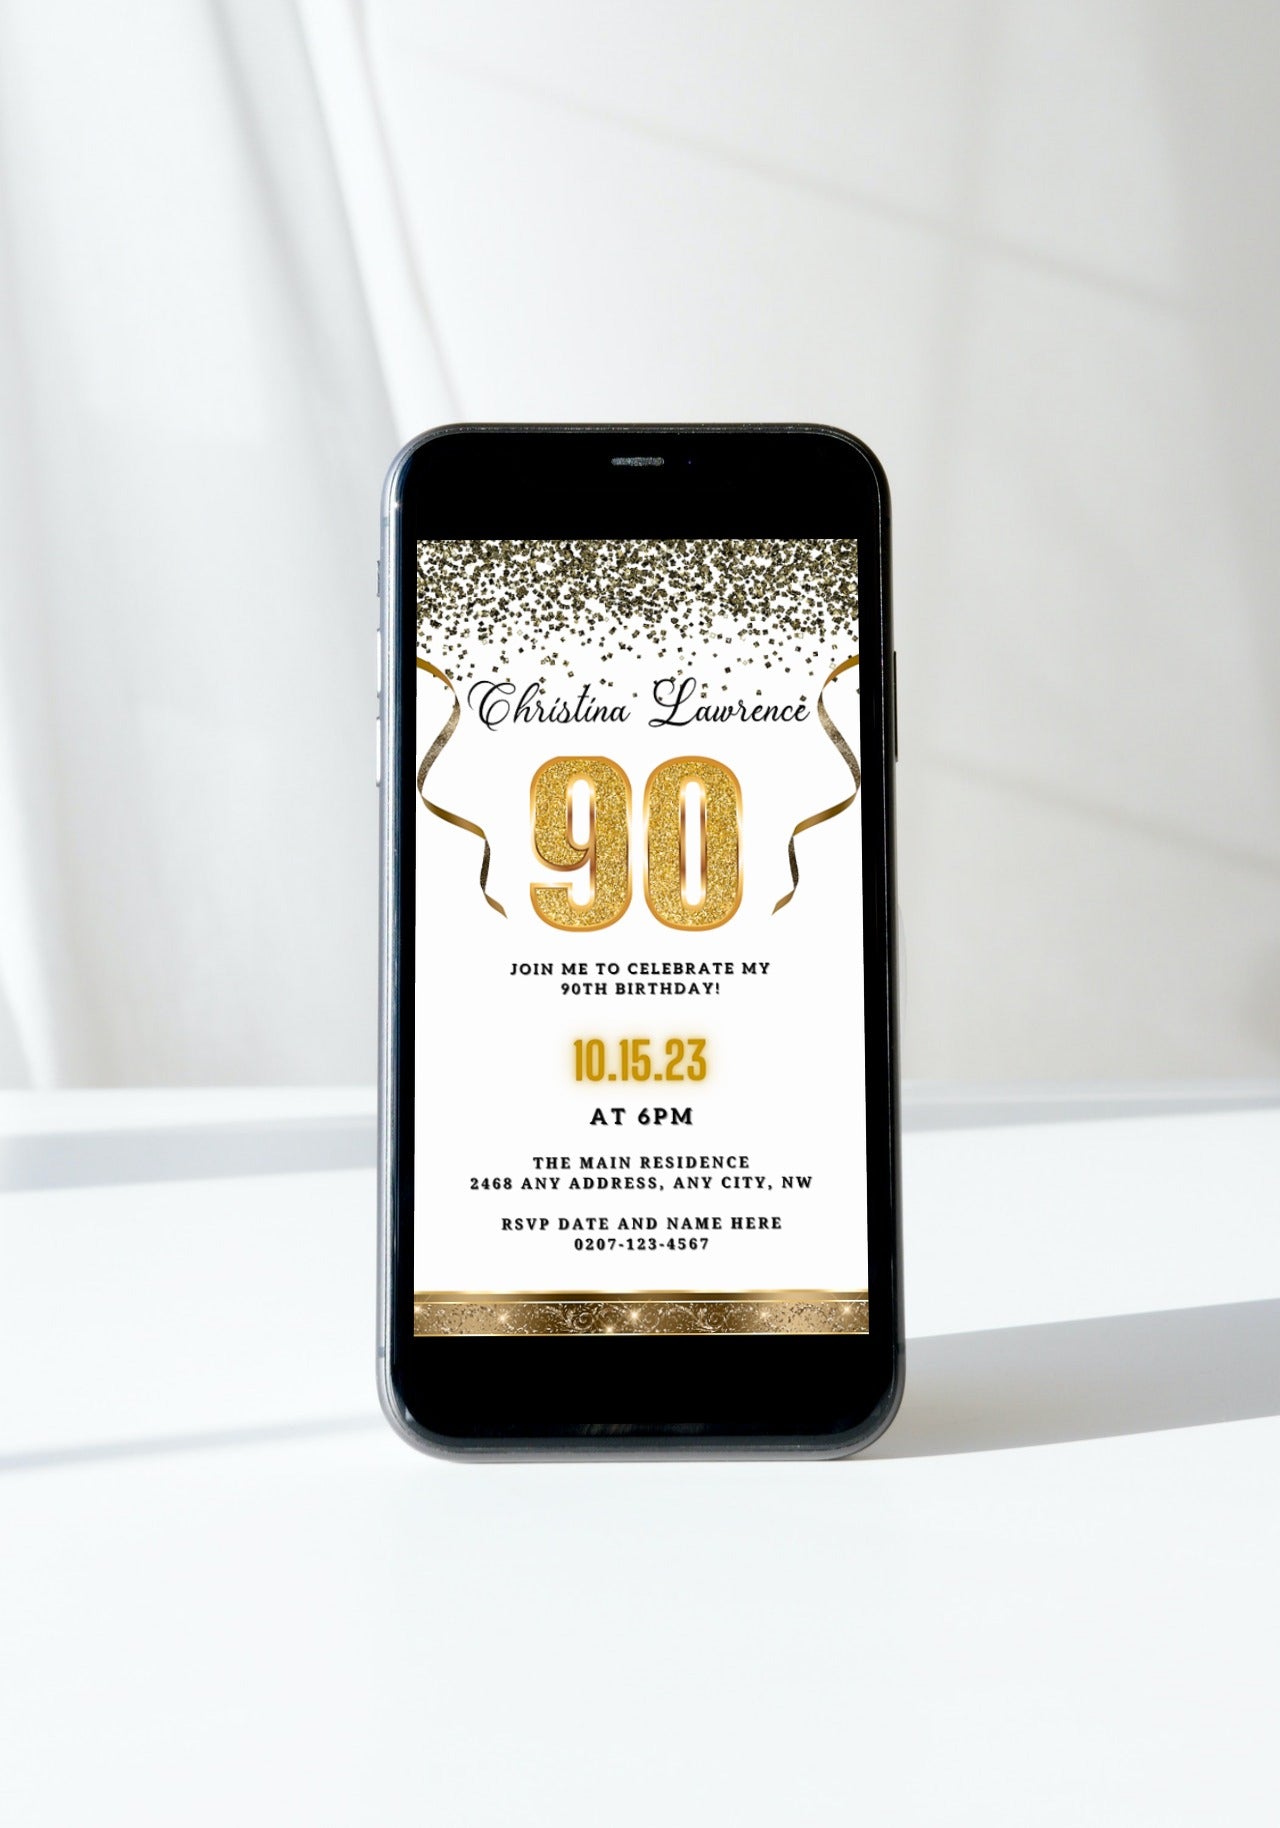 Customisable Digital White Gold Confetti 90th Birthday Evite displayed on smartphone screen with gold and white design elements.